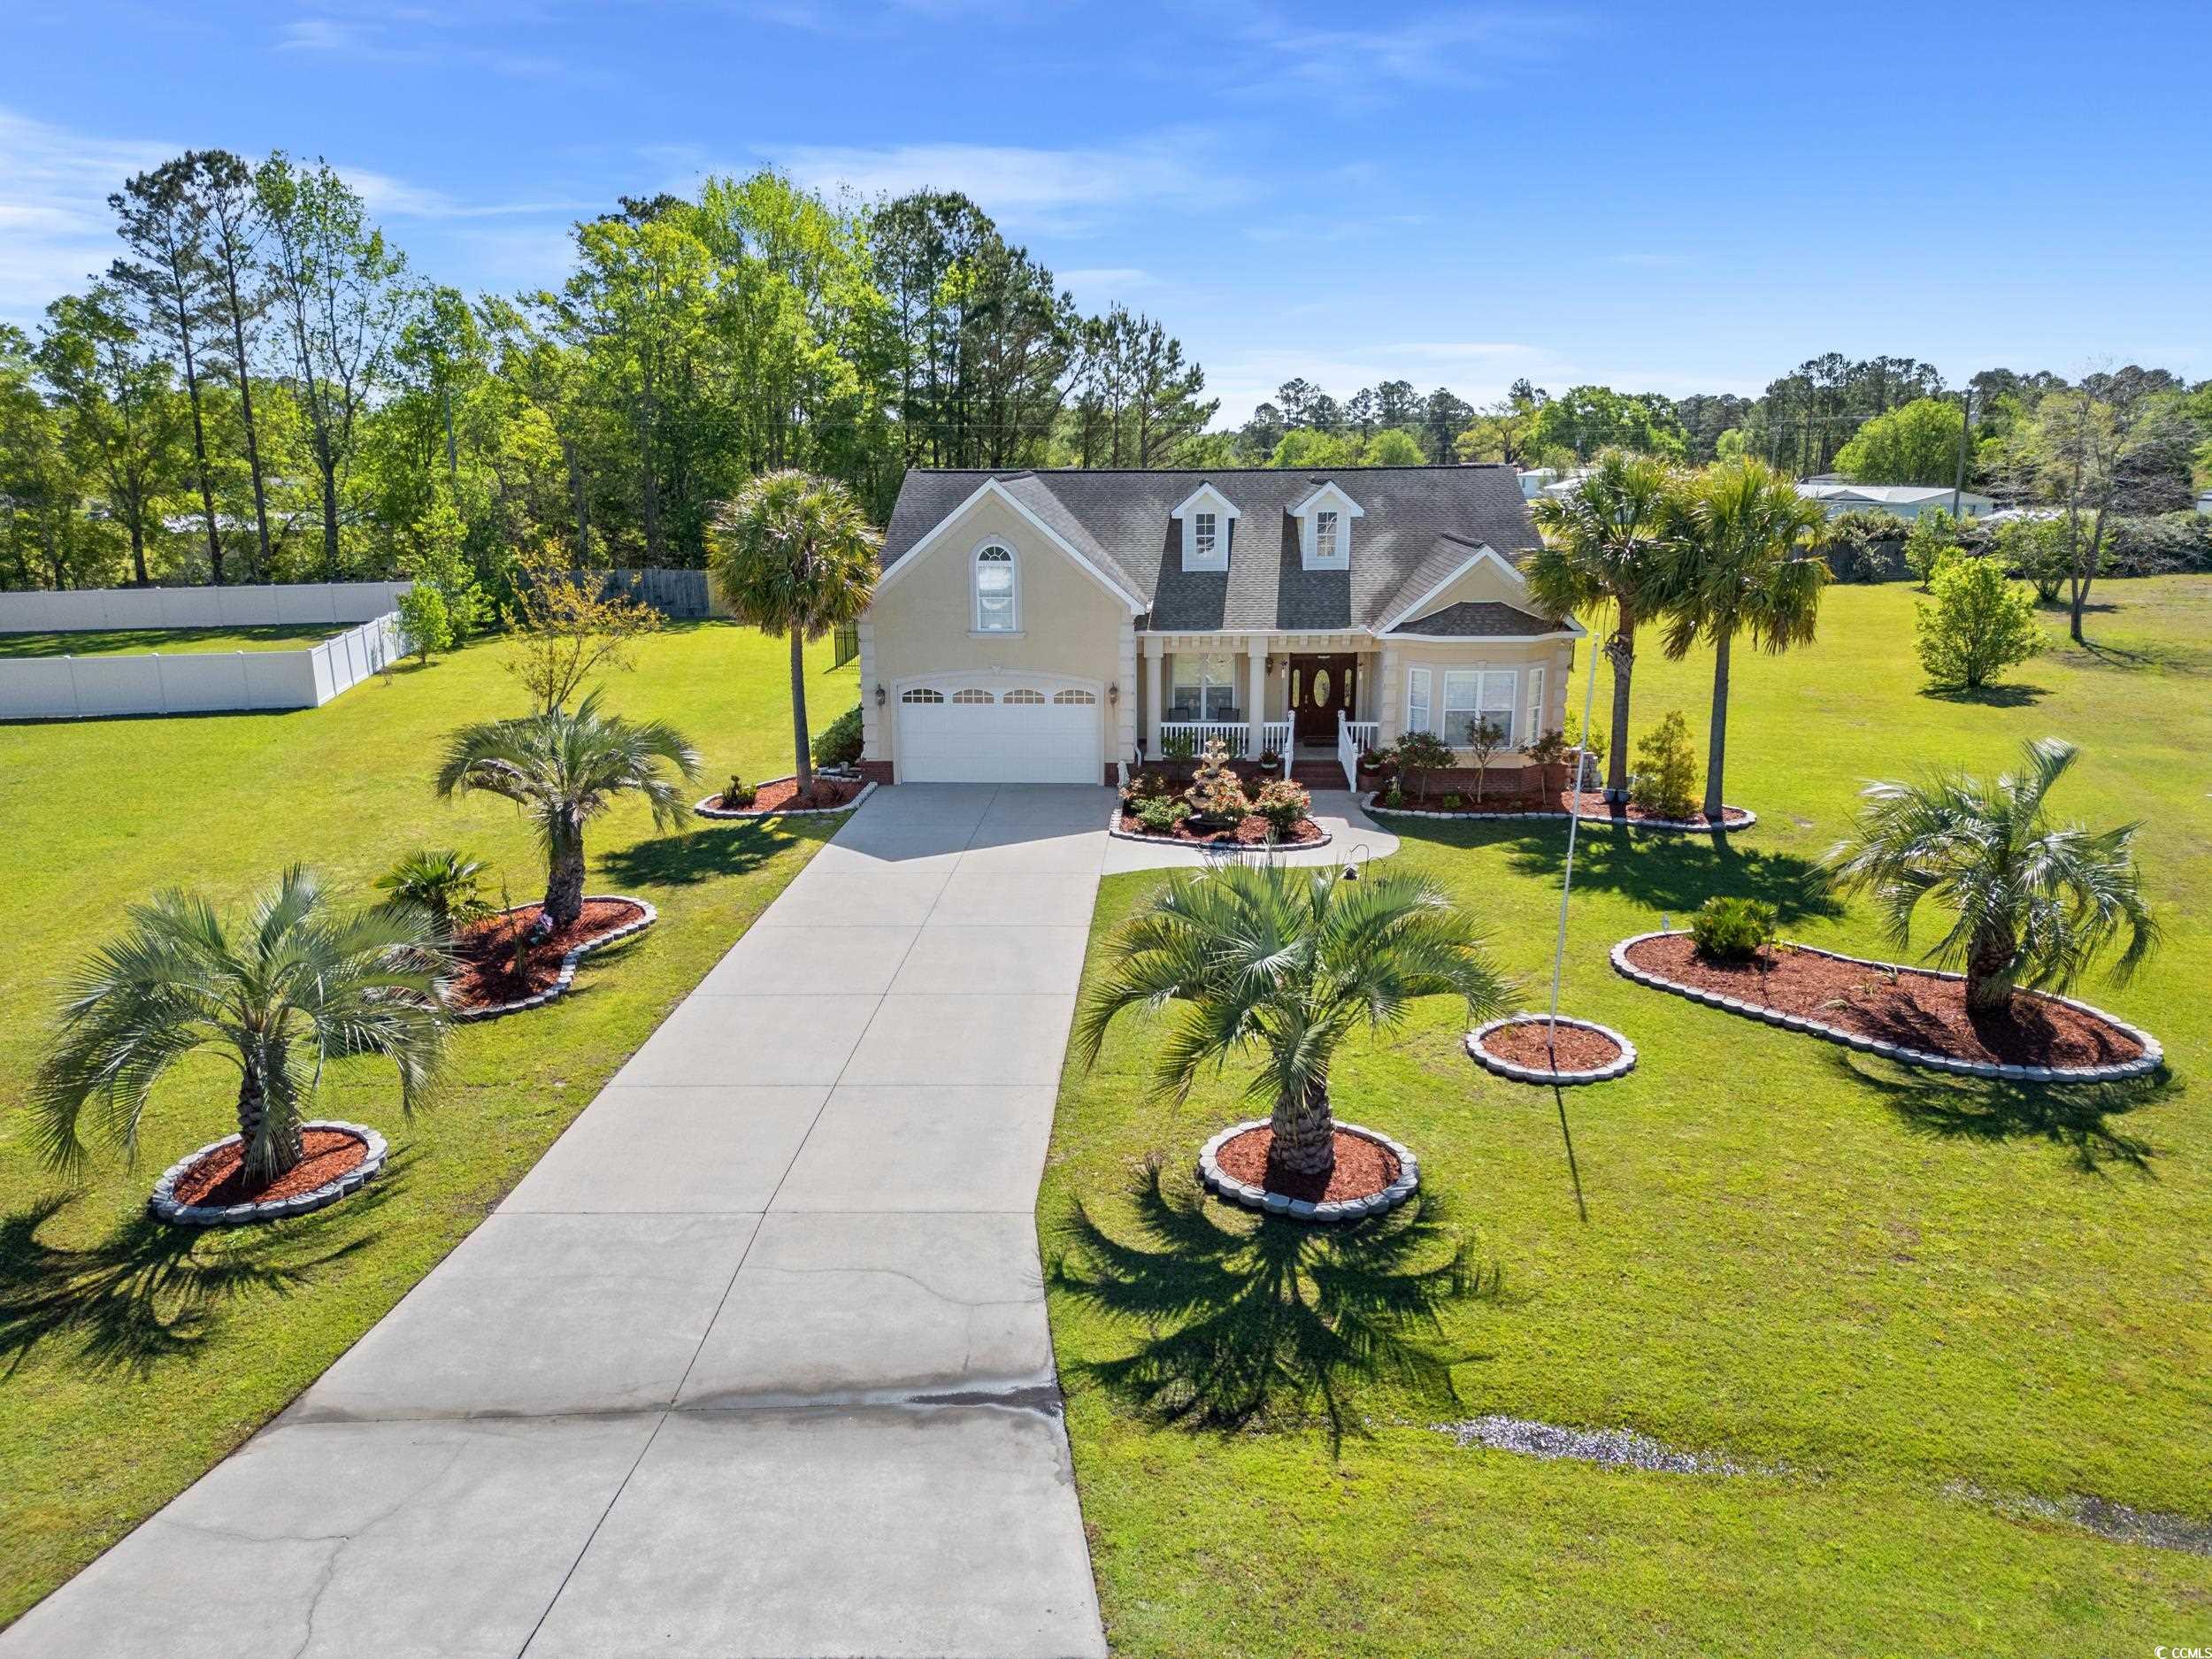 this beautiful custom home is waiting for you, just minutes from downtown conway!  located in the faith hills community, this amazing home has all the curb appeal you could ever want! as you approach this home, you are welcomed with an extra-long driveway that leads you to a relaxing and inviting front porch! when you open the front door, you will immediately see the stunning marble tile floors and the open concept. hardwood flooring exists throughout the dining and family room. the owner remodeled the kitchen with state-of-the-art appliances, which makes cooking a joy. there are four first floor bedrooms, including a mother-in-law suite to give everyone plenty of space. a bonus room is located upstairs that could serve as a fifth bedroom or many different purposes. custom light fixtures can be found in the great room and master bedroom. the master bath is a little piece of heaven with custom tile and a jacuzzi tub for your relaxation. don’t forget the carolina room that overlooks the fenced in backyard complete with patio, which is perfect for entertaining, playing and family dogs. this is country living at its best with easy access to highway 501, conway and the beach. schedule your showing today to see this rare beauty in person!